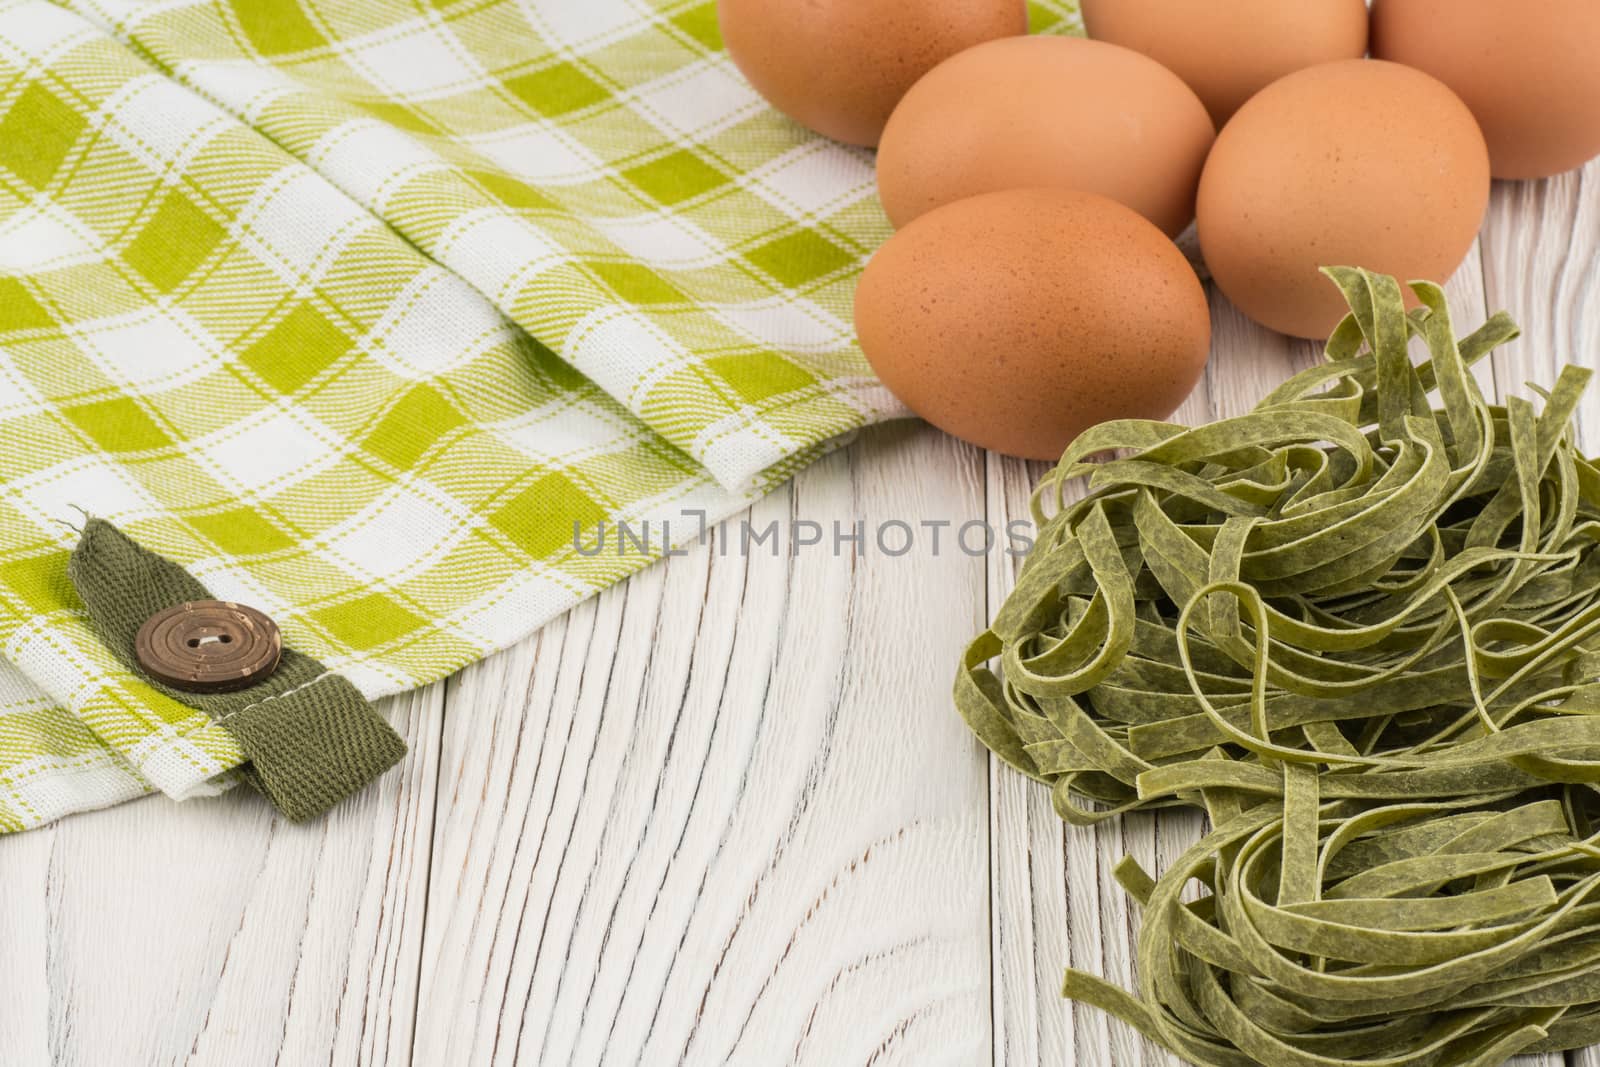 Raw green Italian pasta on old wooden table. Selective focus.